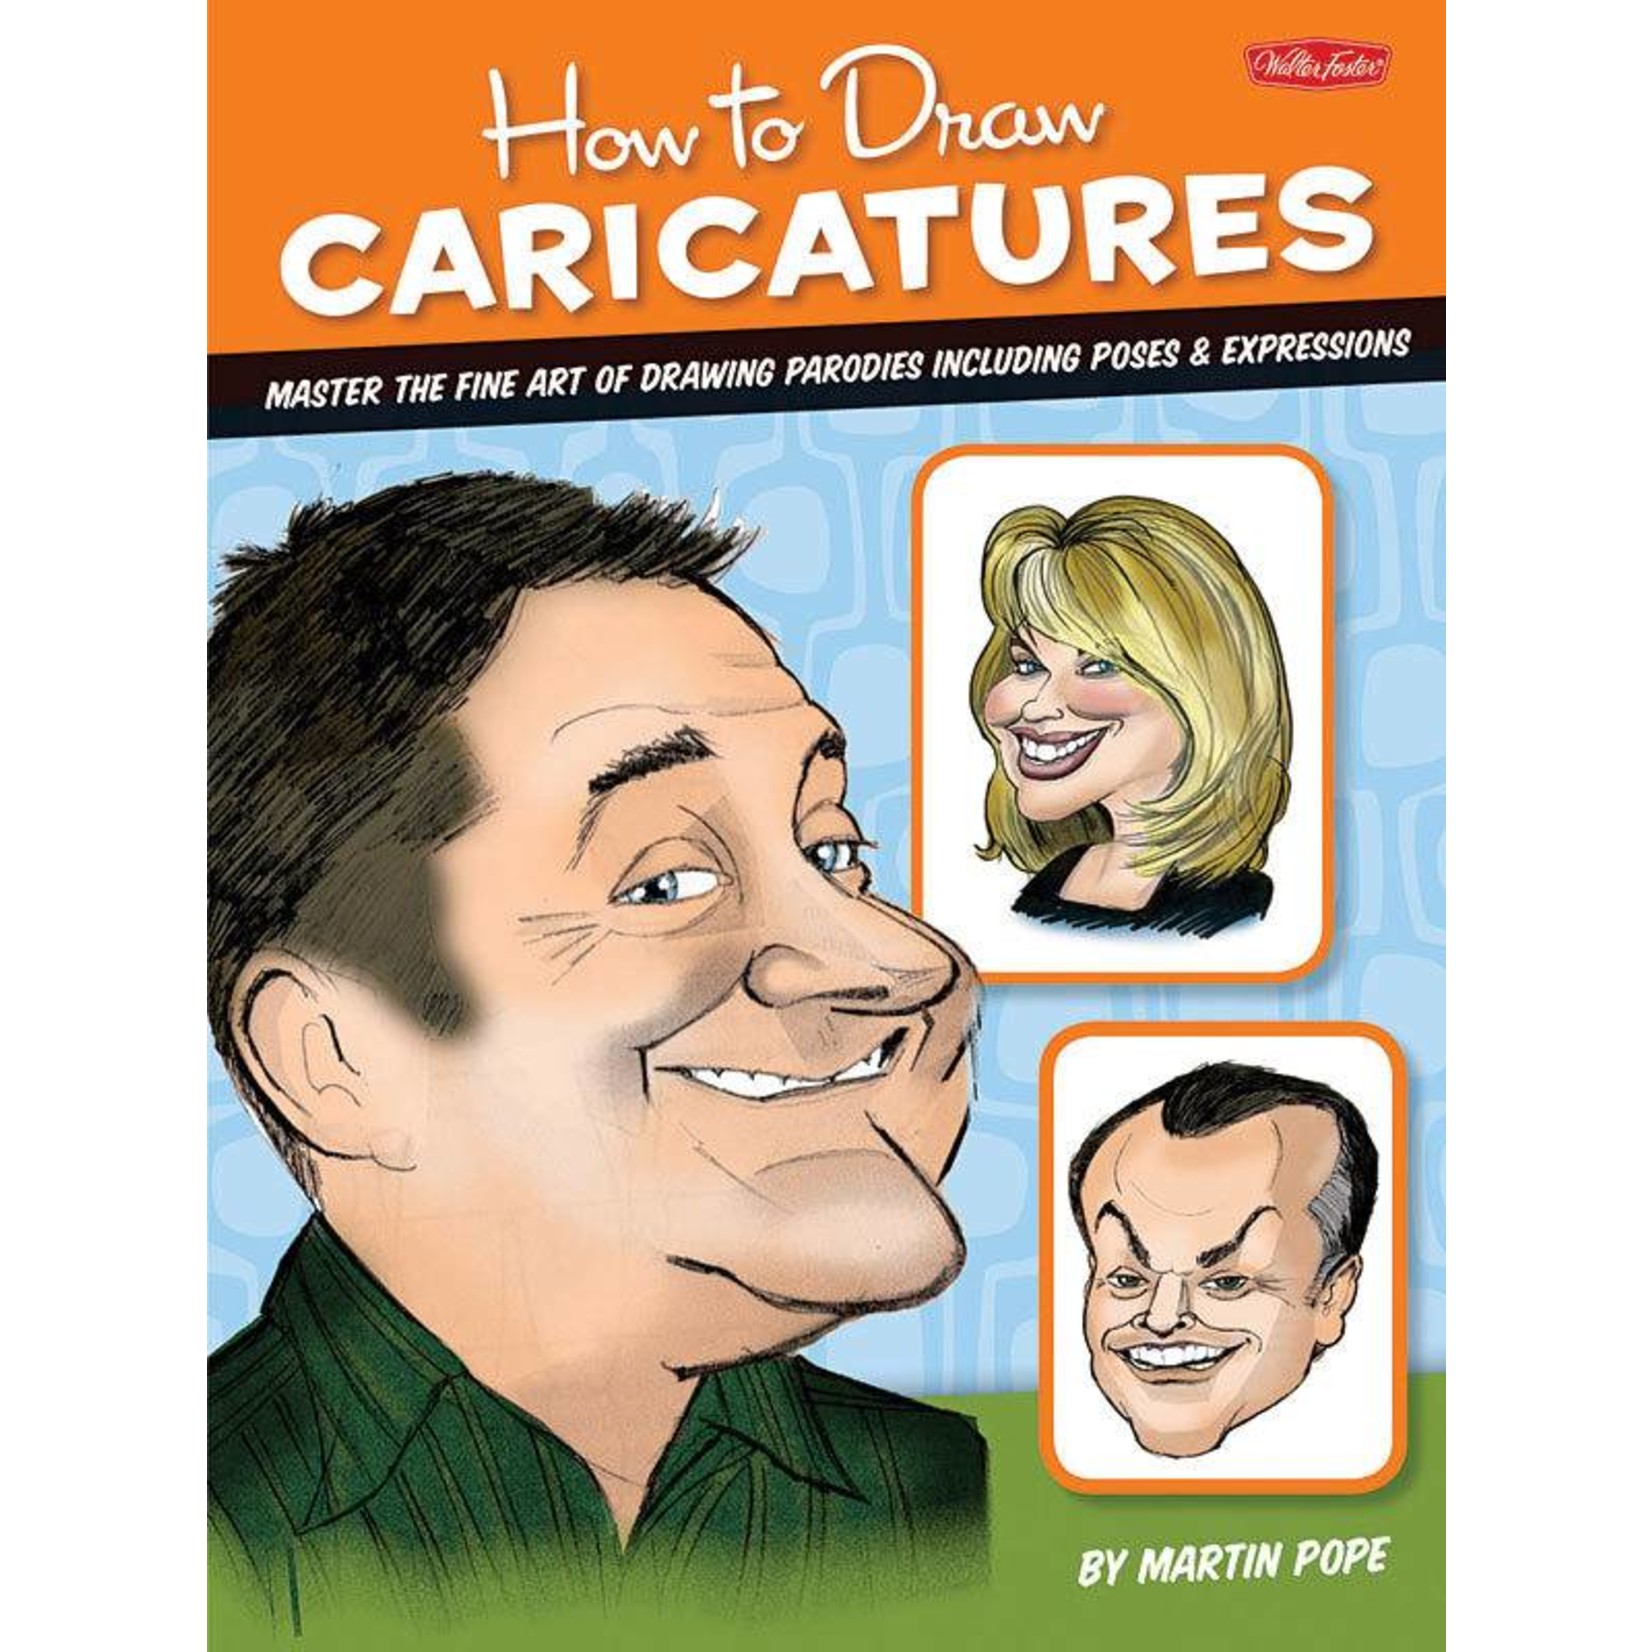 WALTER FOSTER WALTER FOSTER HOW TO DRAW CARICATURES FOS-CAR1